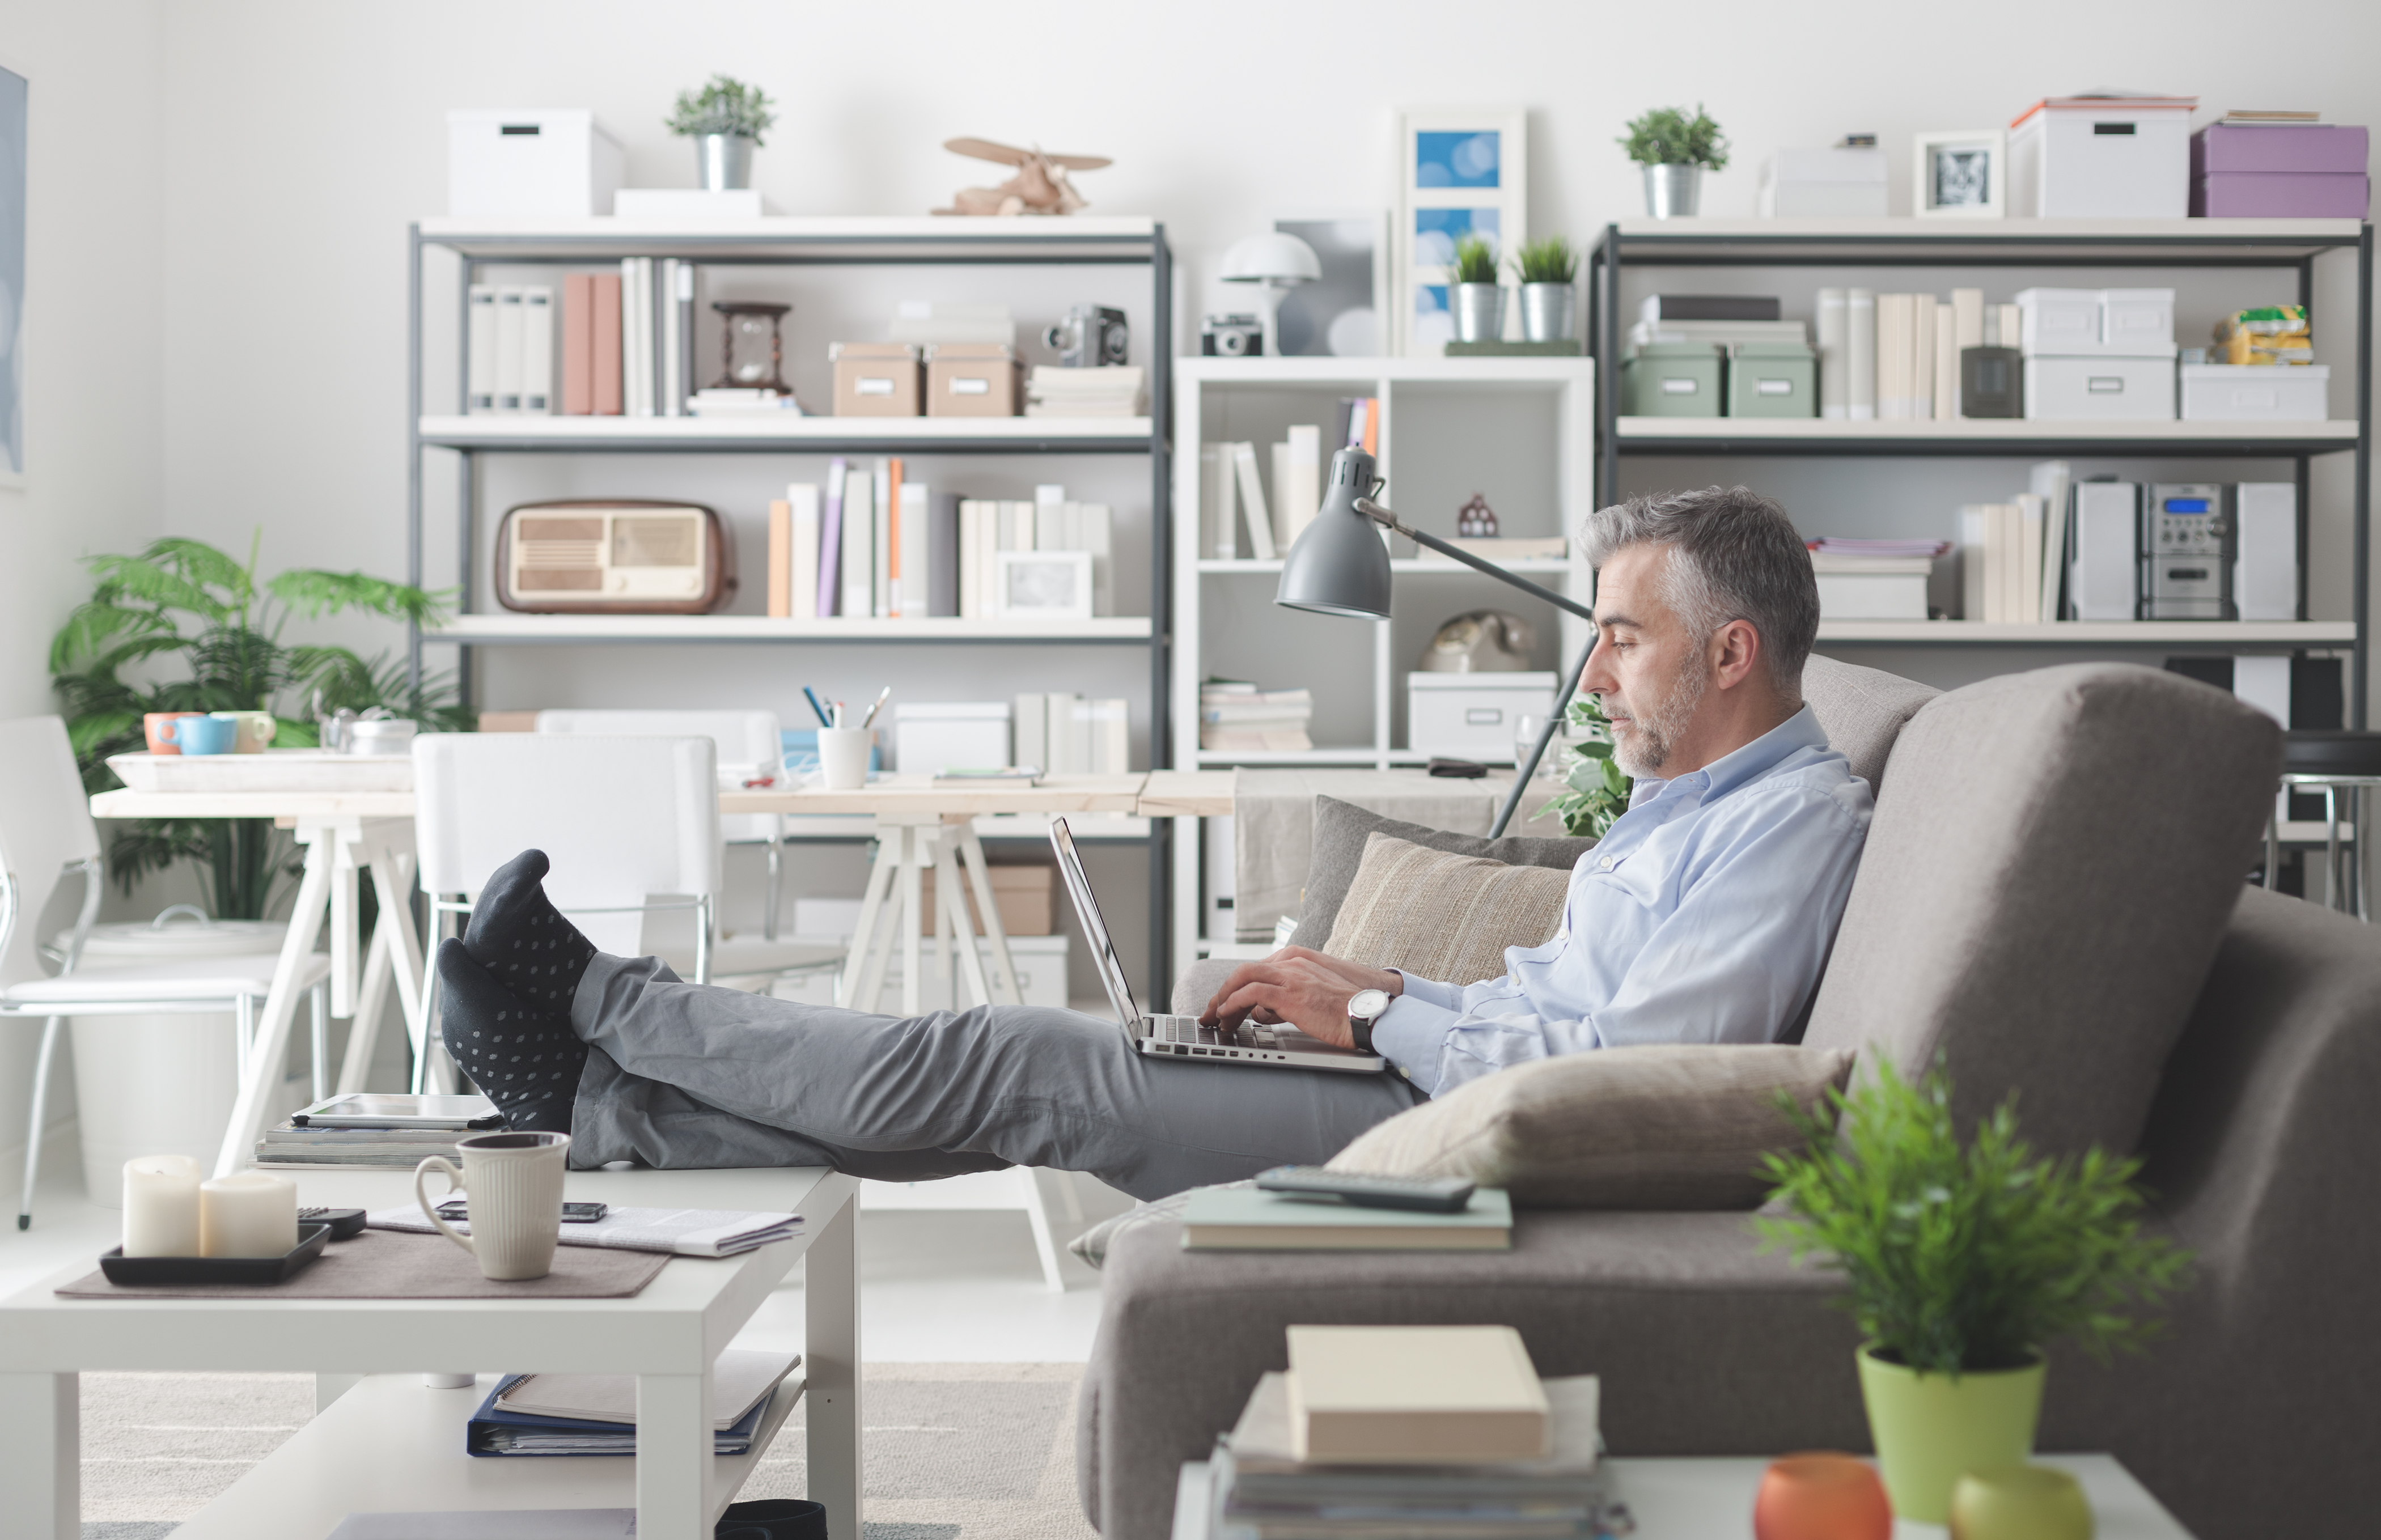 Working from Home During a Crisis: 5 Tips for Productivity